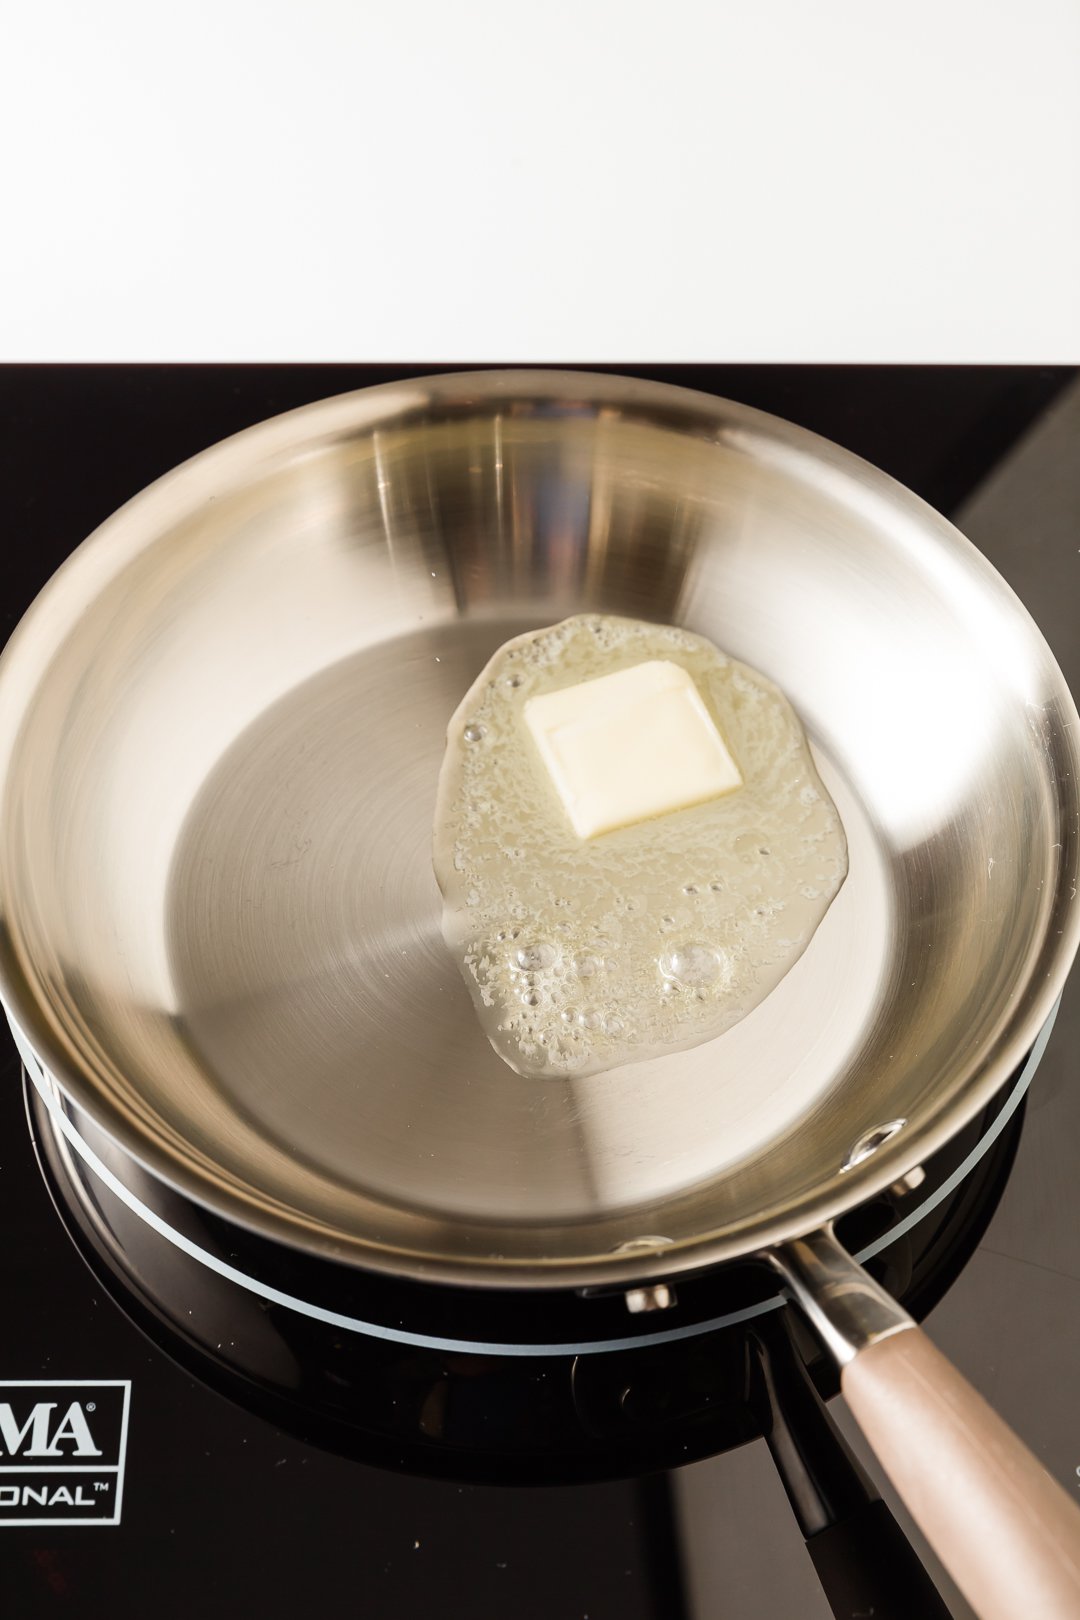 A pat of butter melting in a skillet